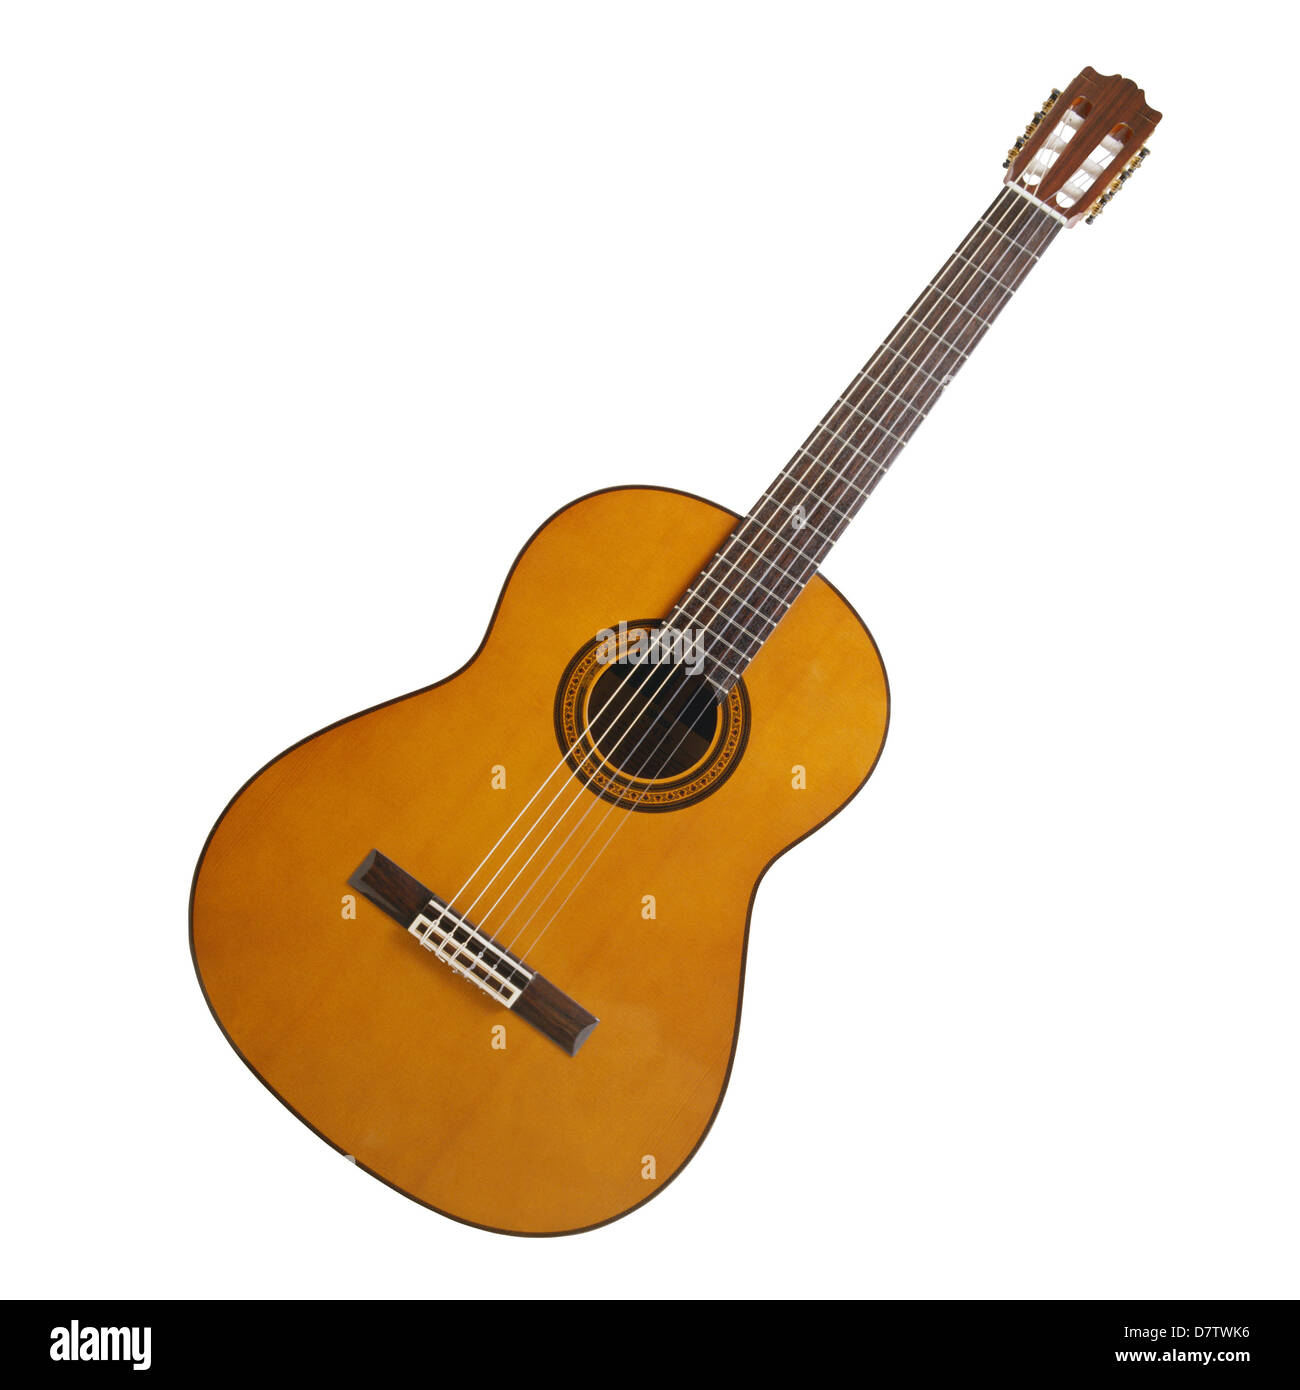 Acoustic guitar on a white background Stock Photo